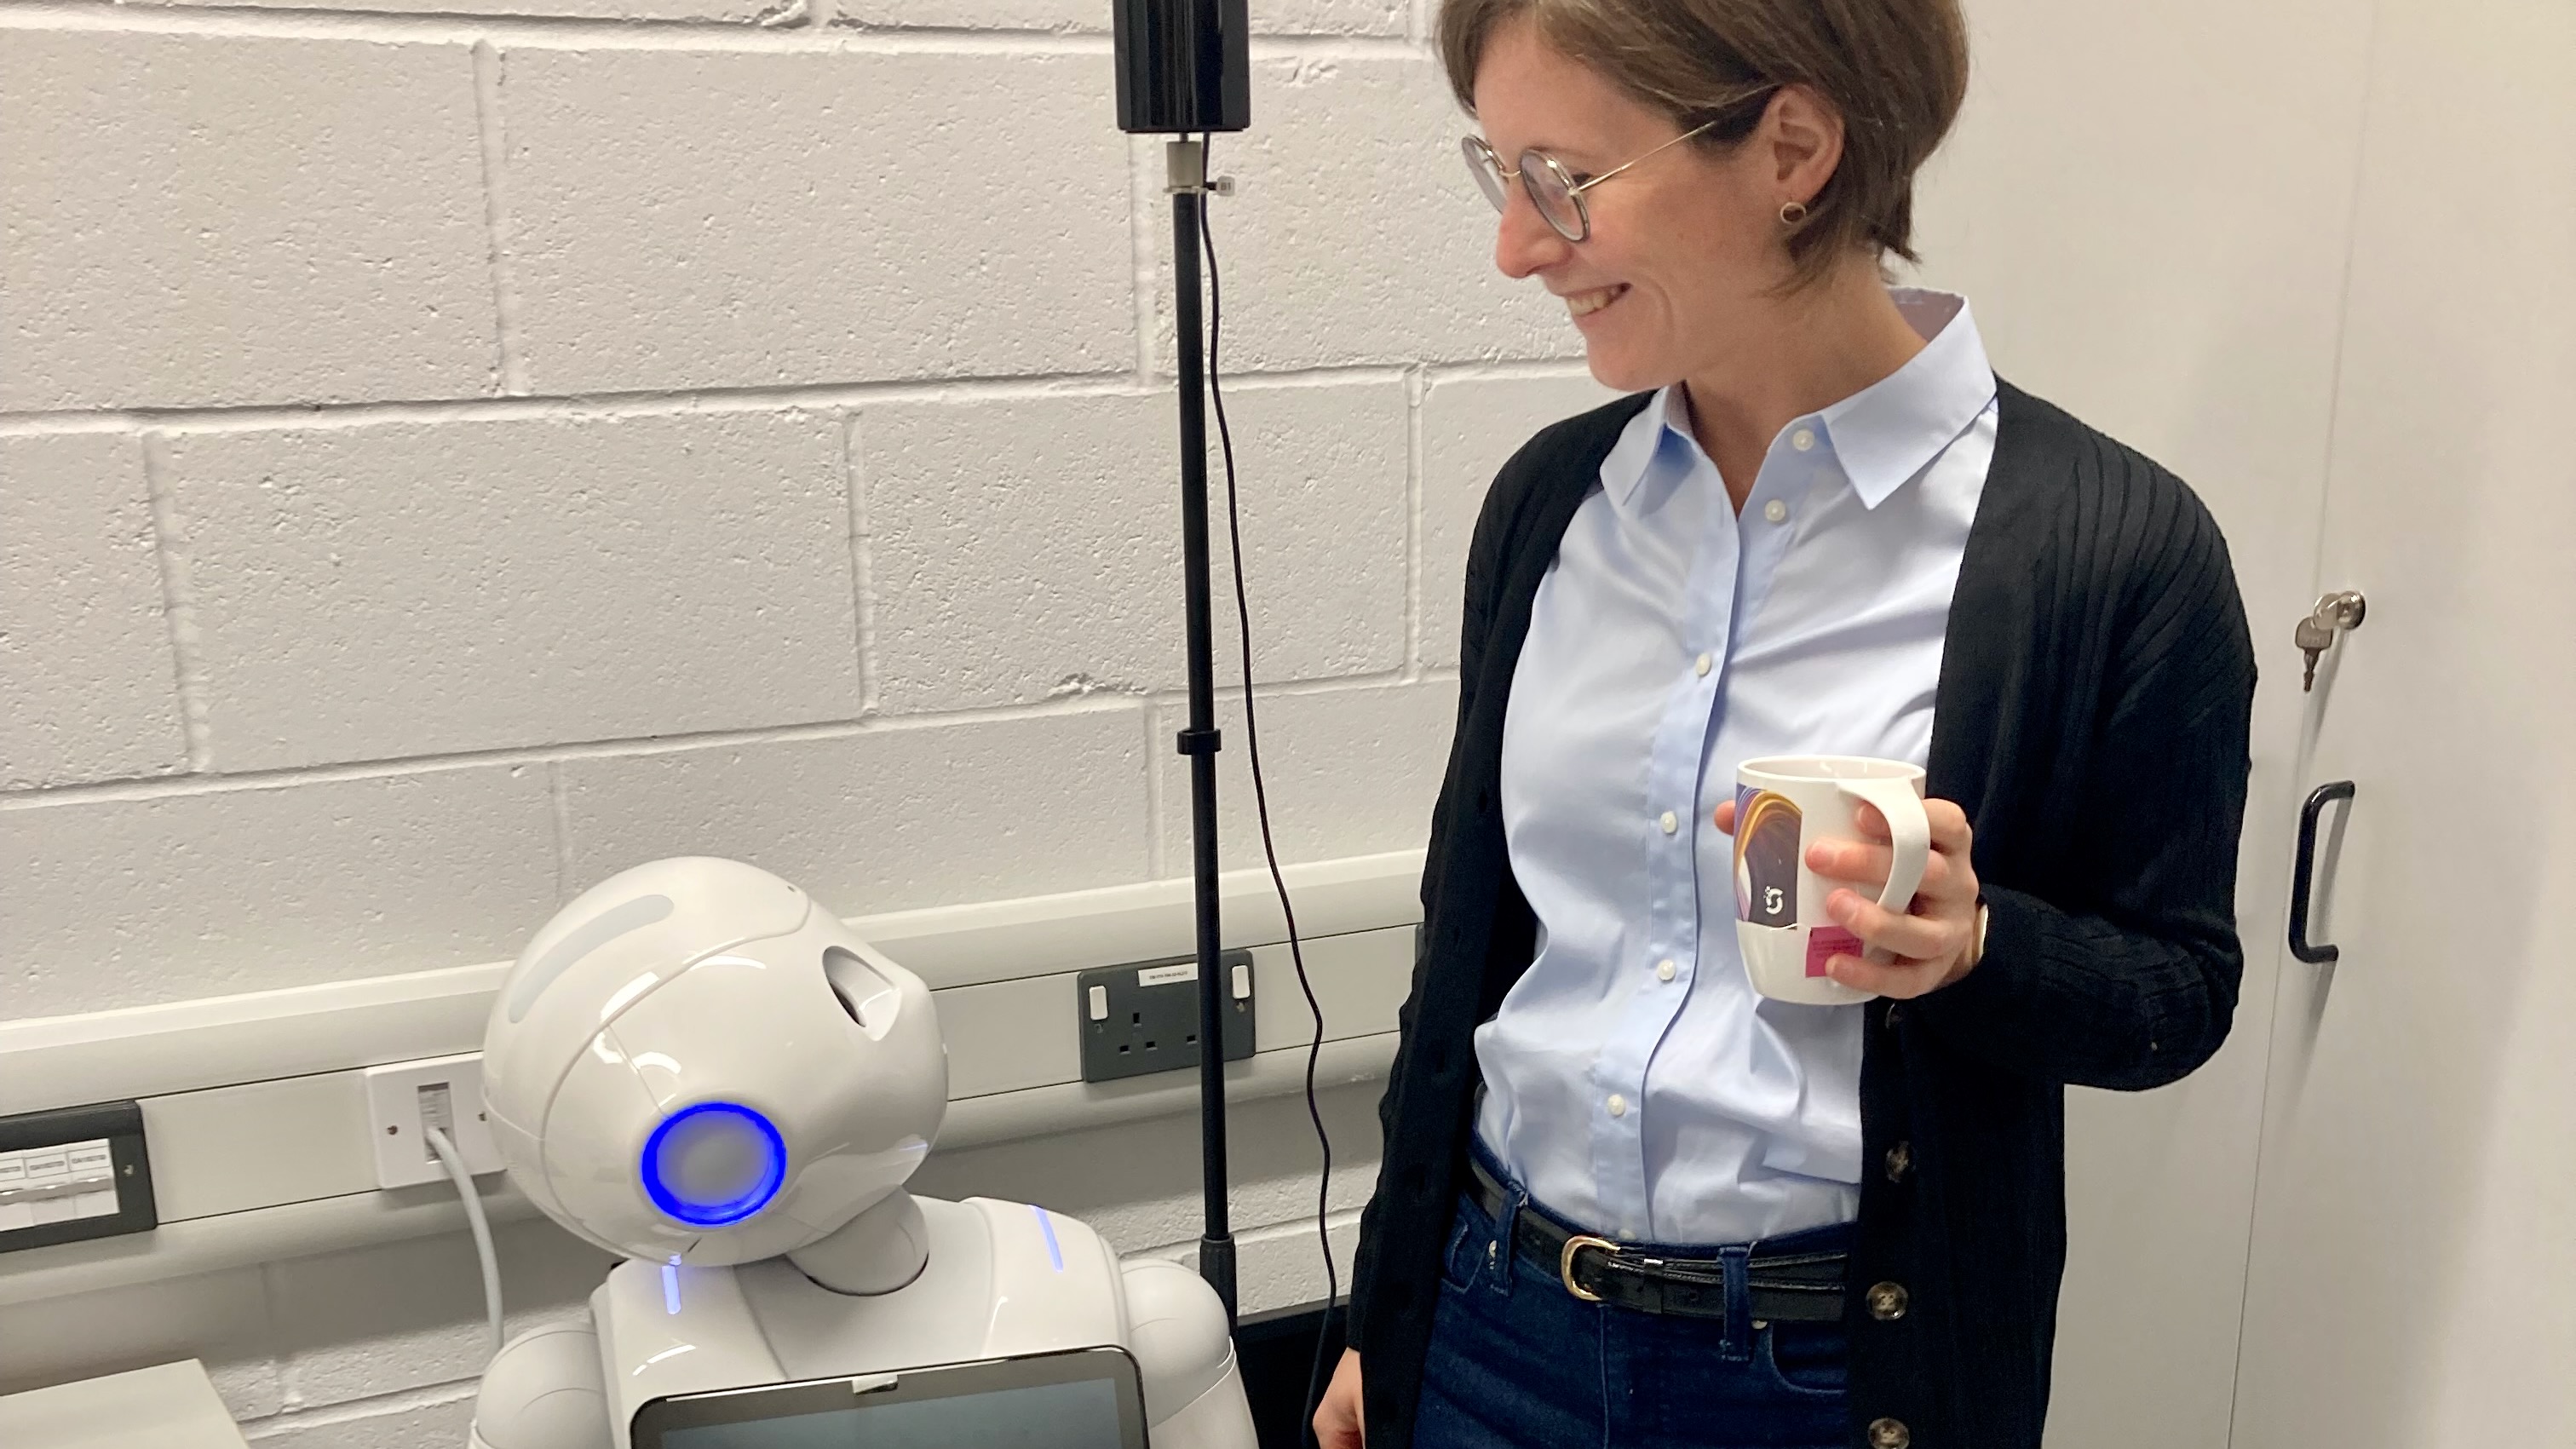 A young woman holding a coffee mug and smiling downwards at a robot.